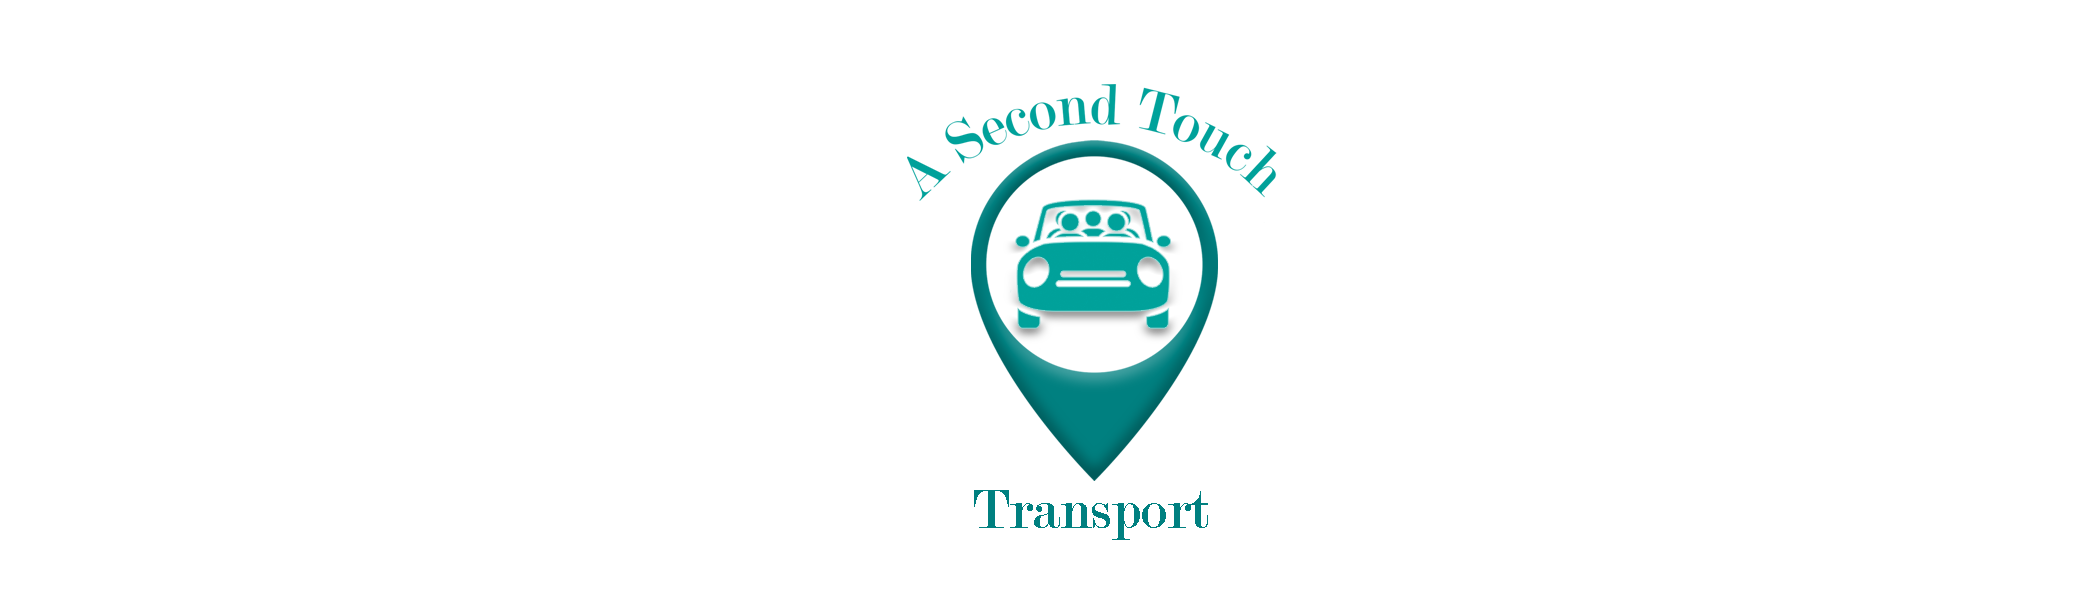 A Second Touch Transport